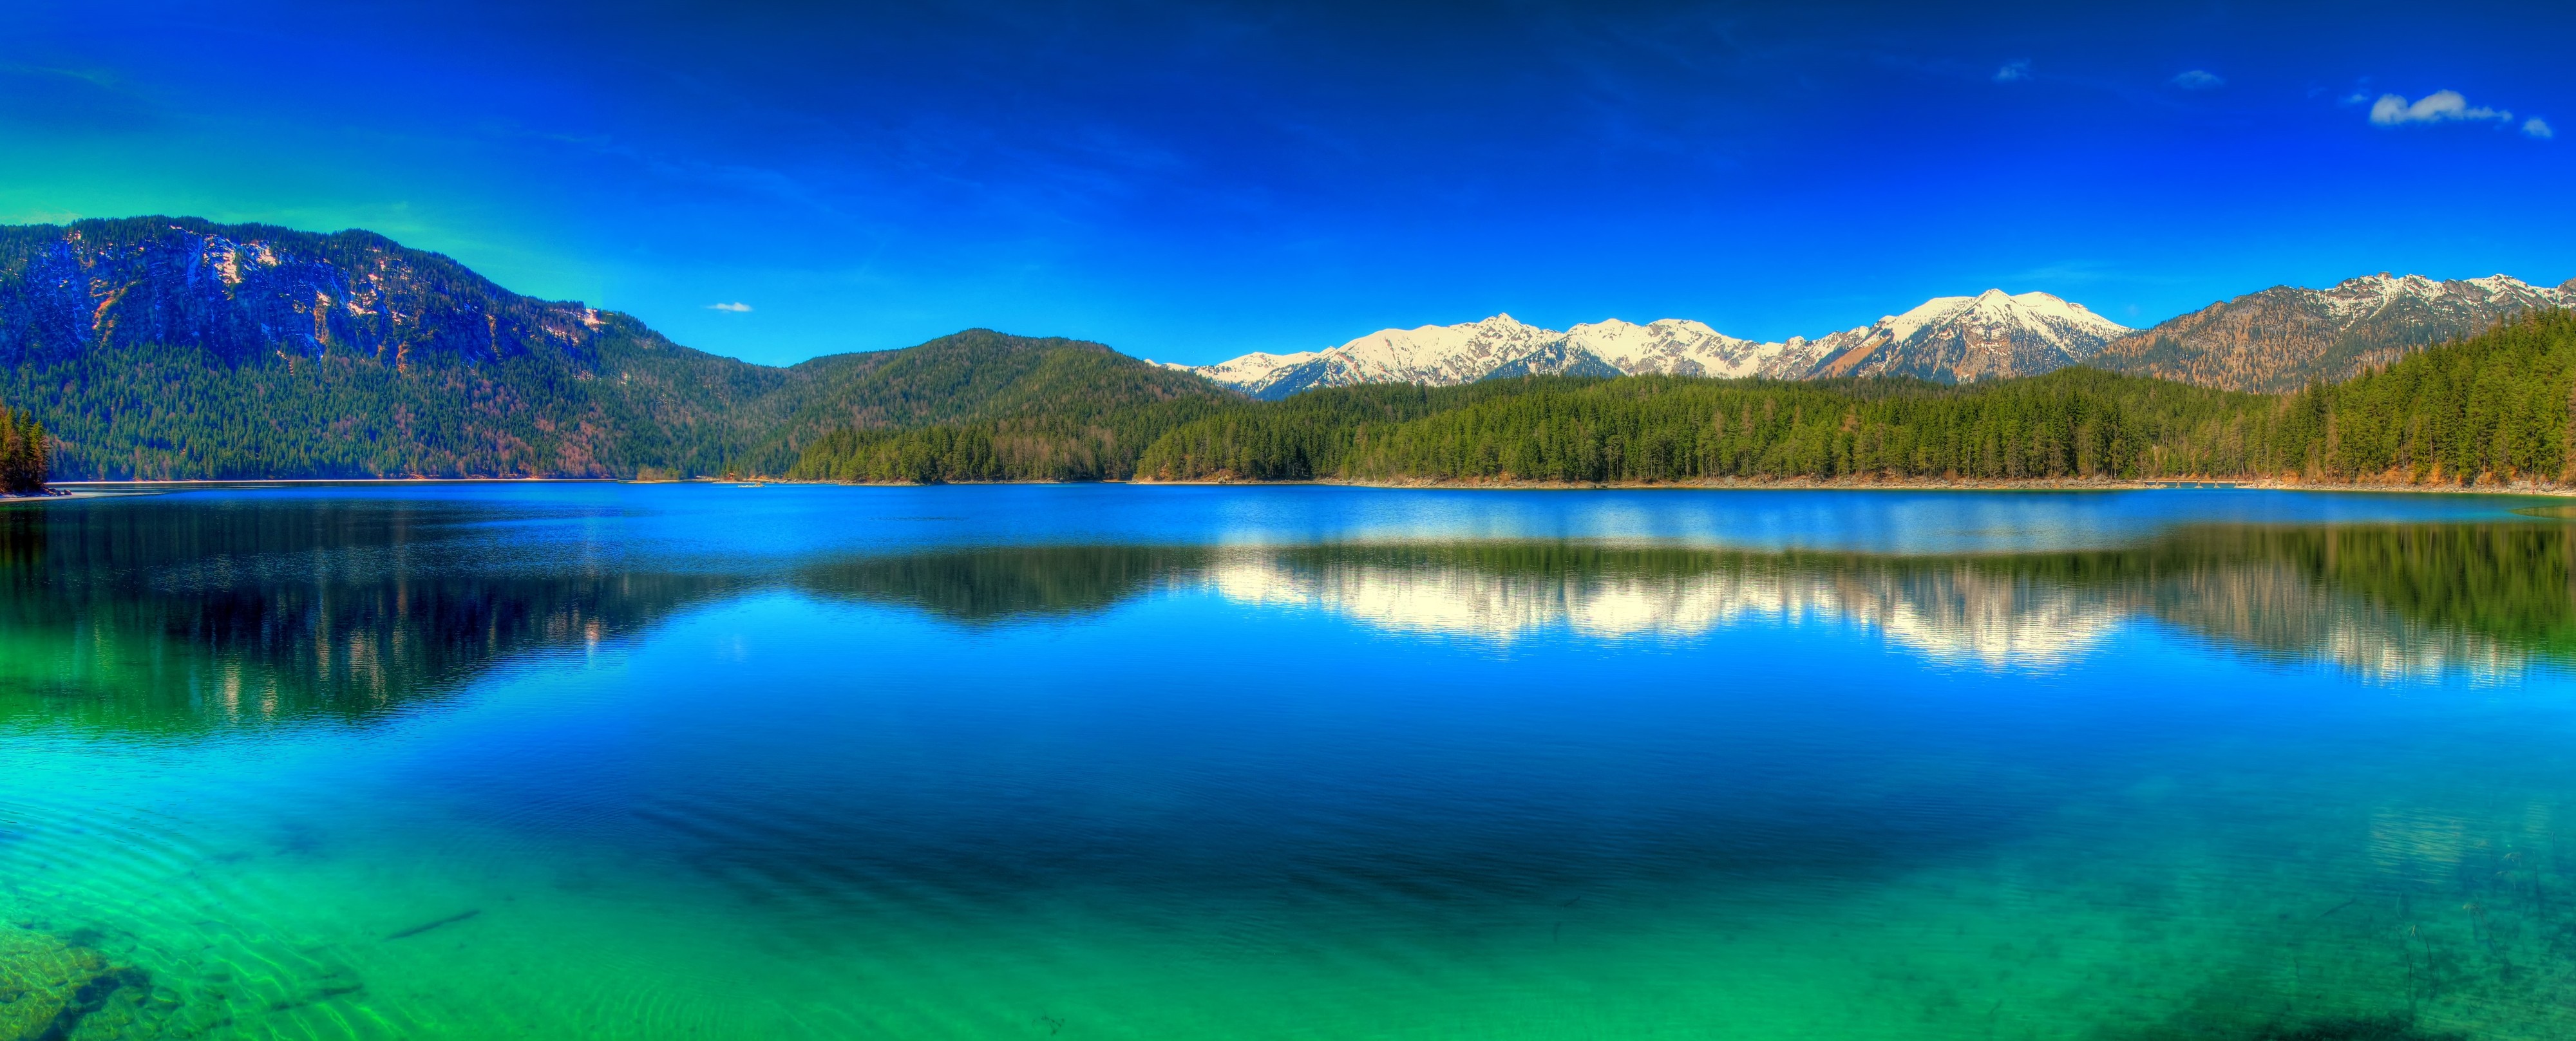 General 4000x1617 nature landscape panorama lake mountains forest Germany blue sky green water reflection snowy peak